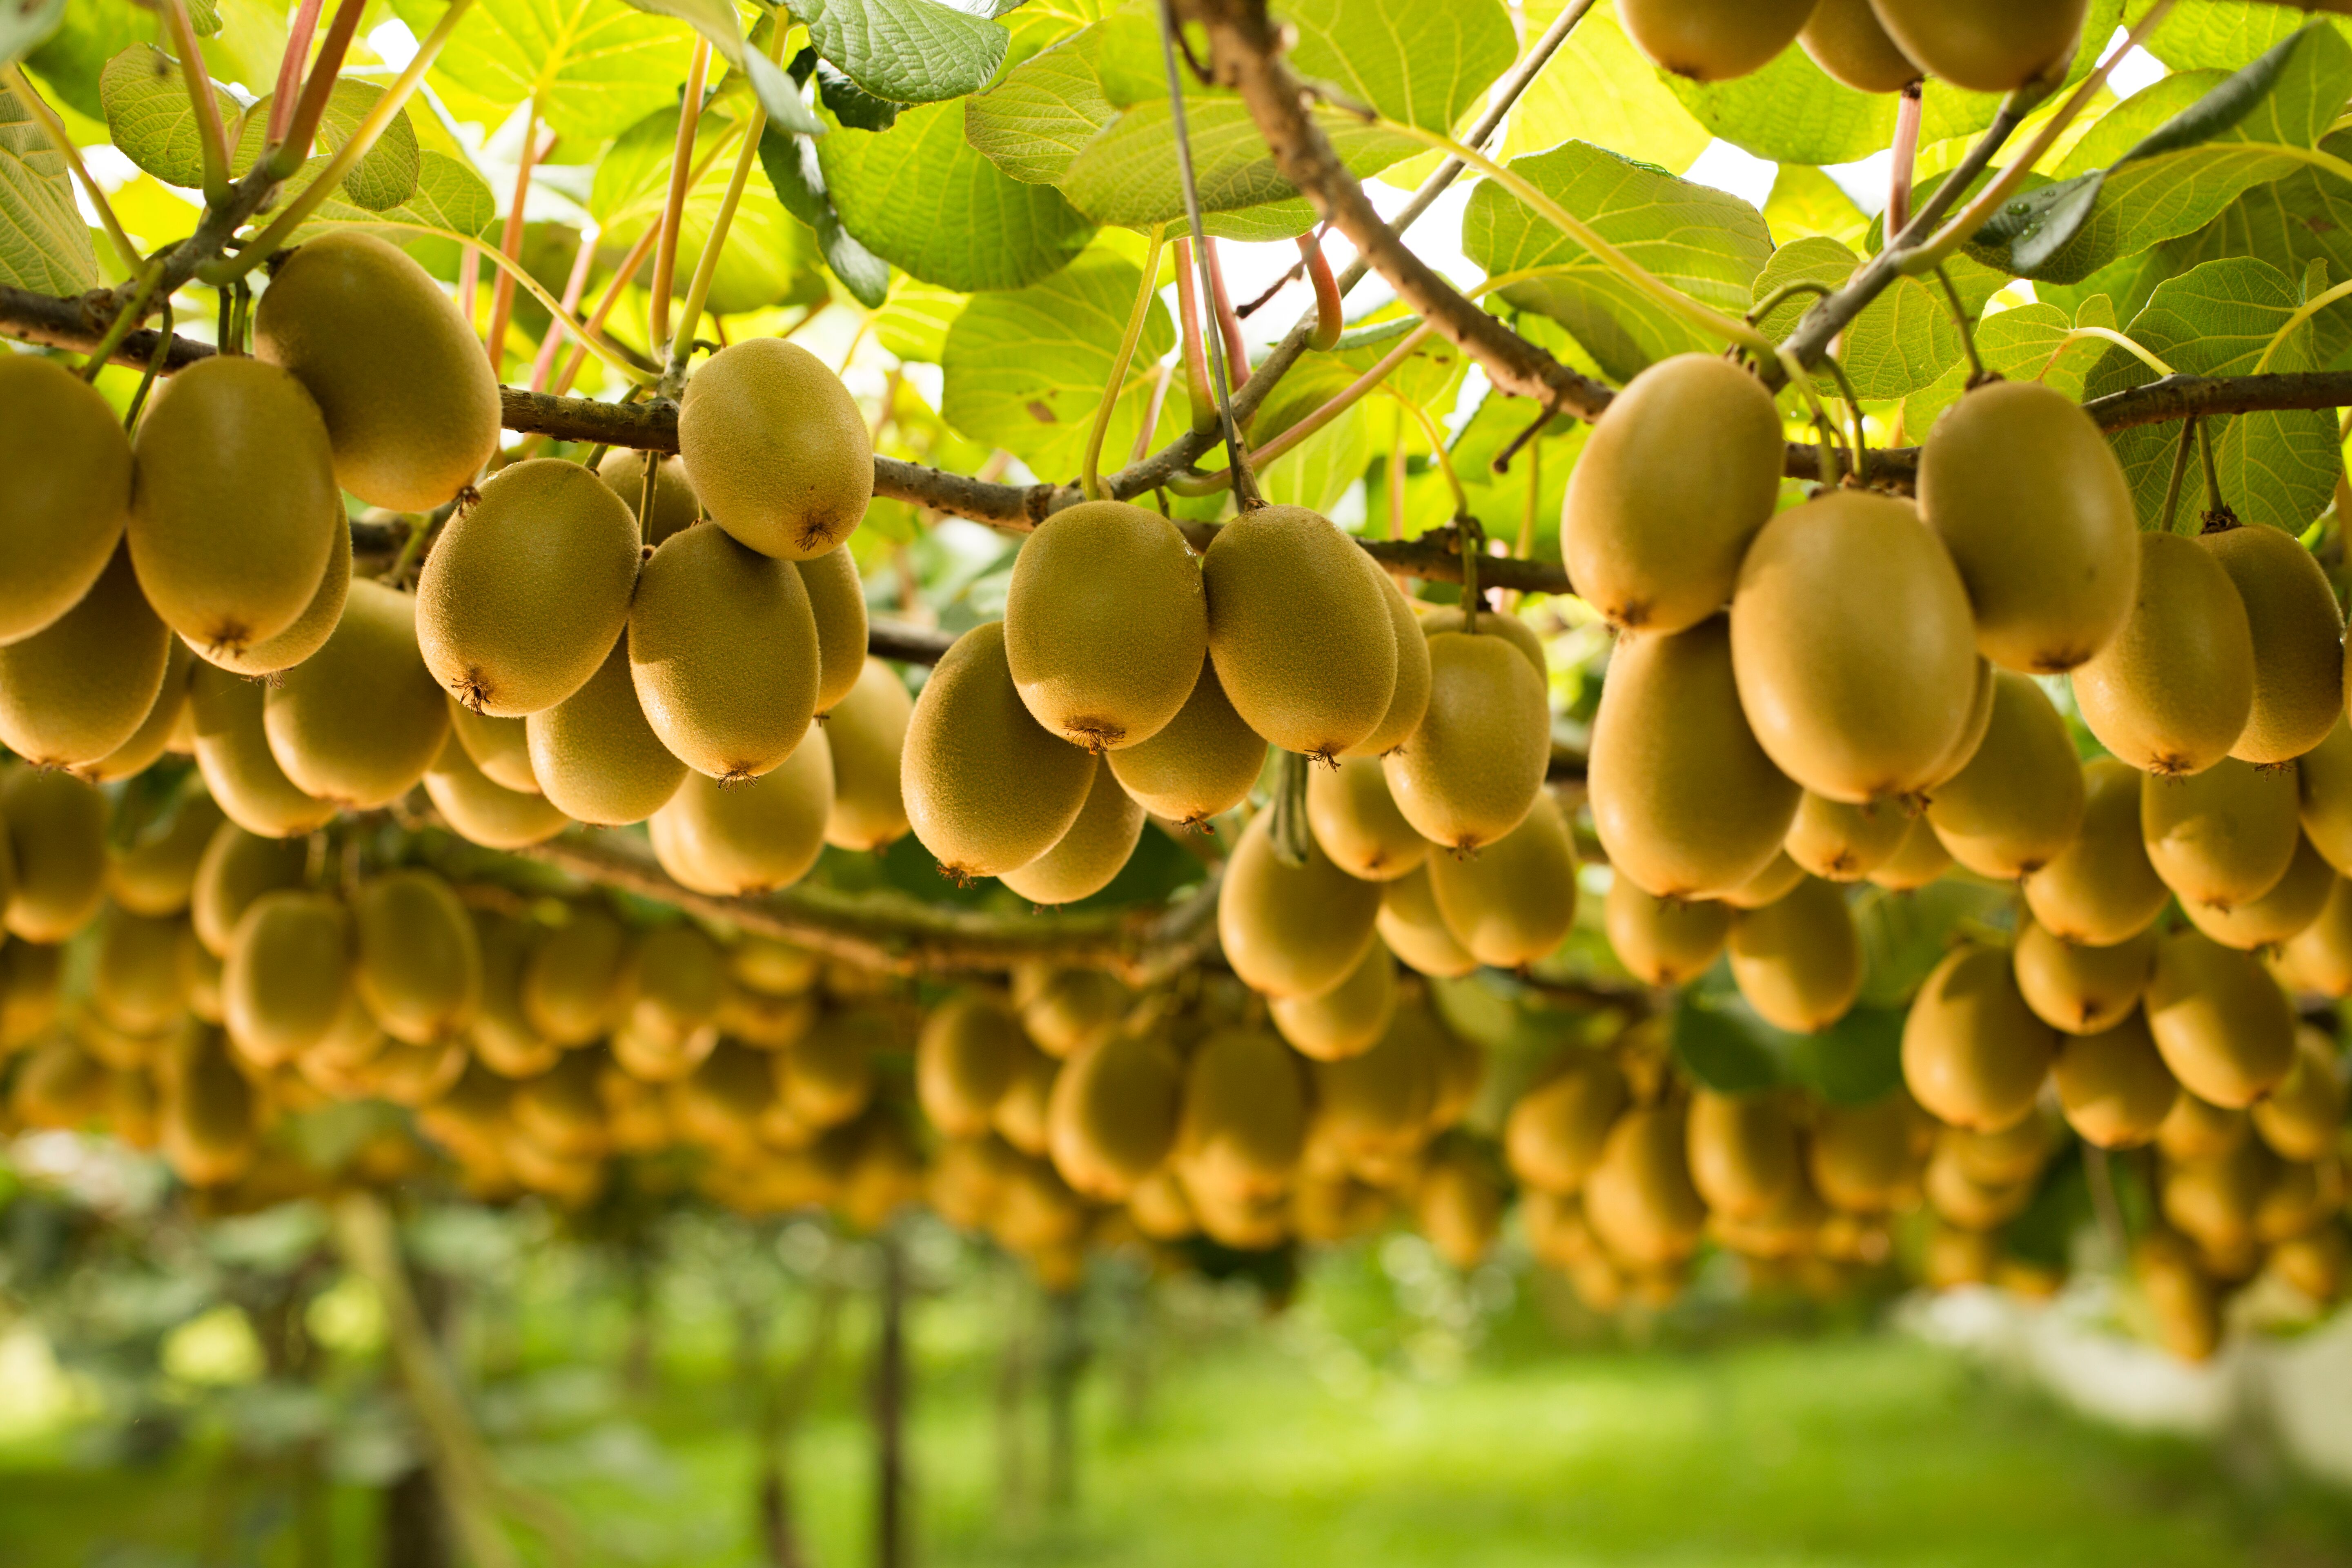 Zespri selects SAP cloud solutions in multi-year deal